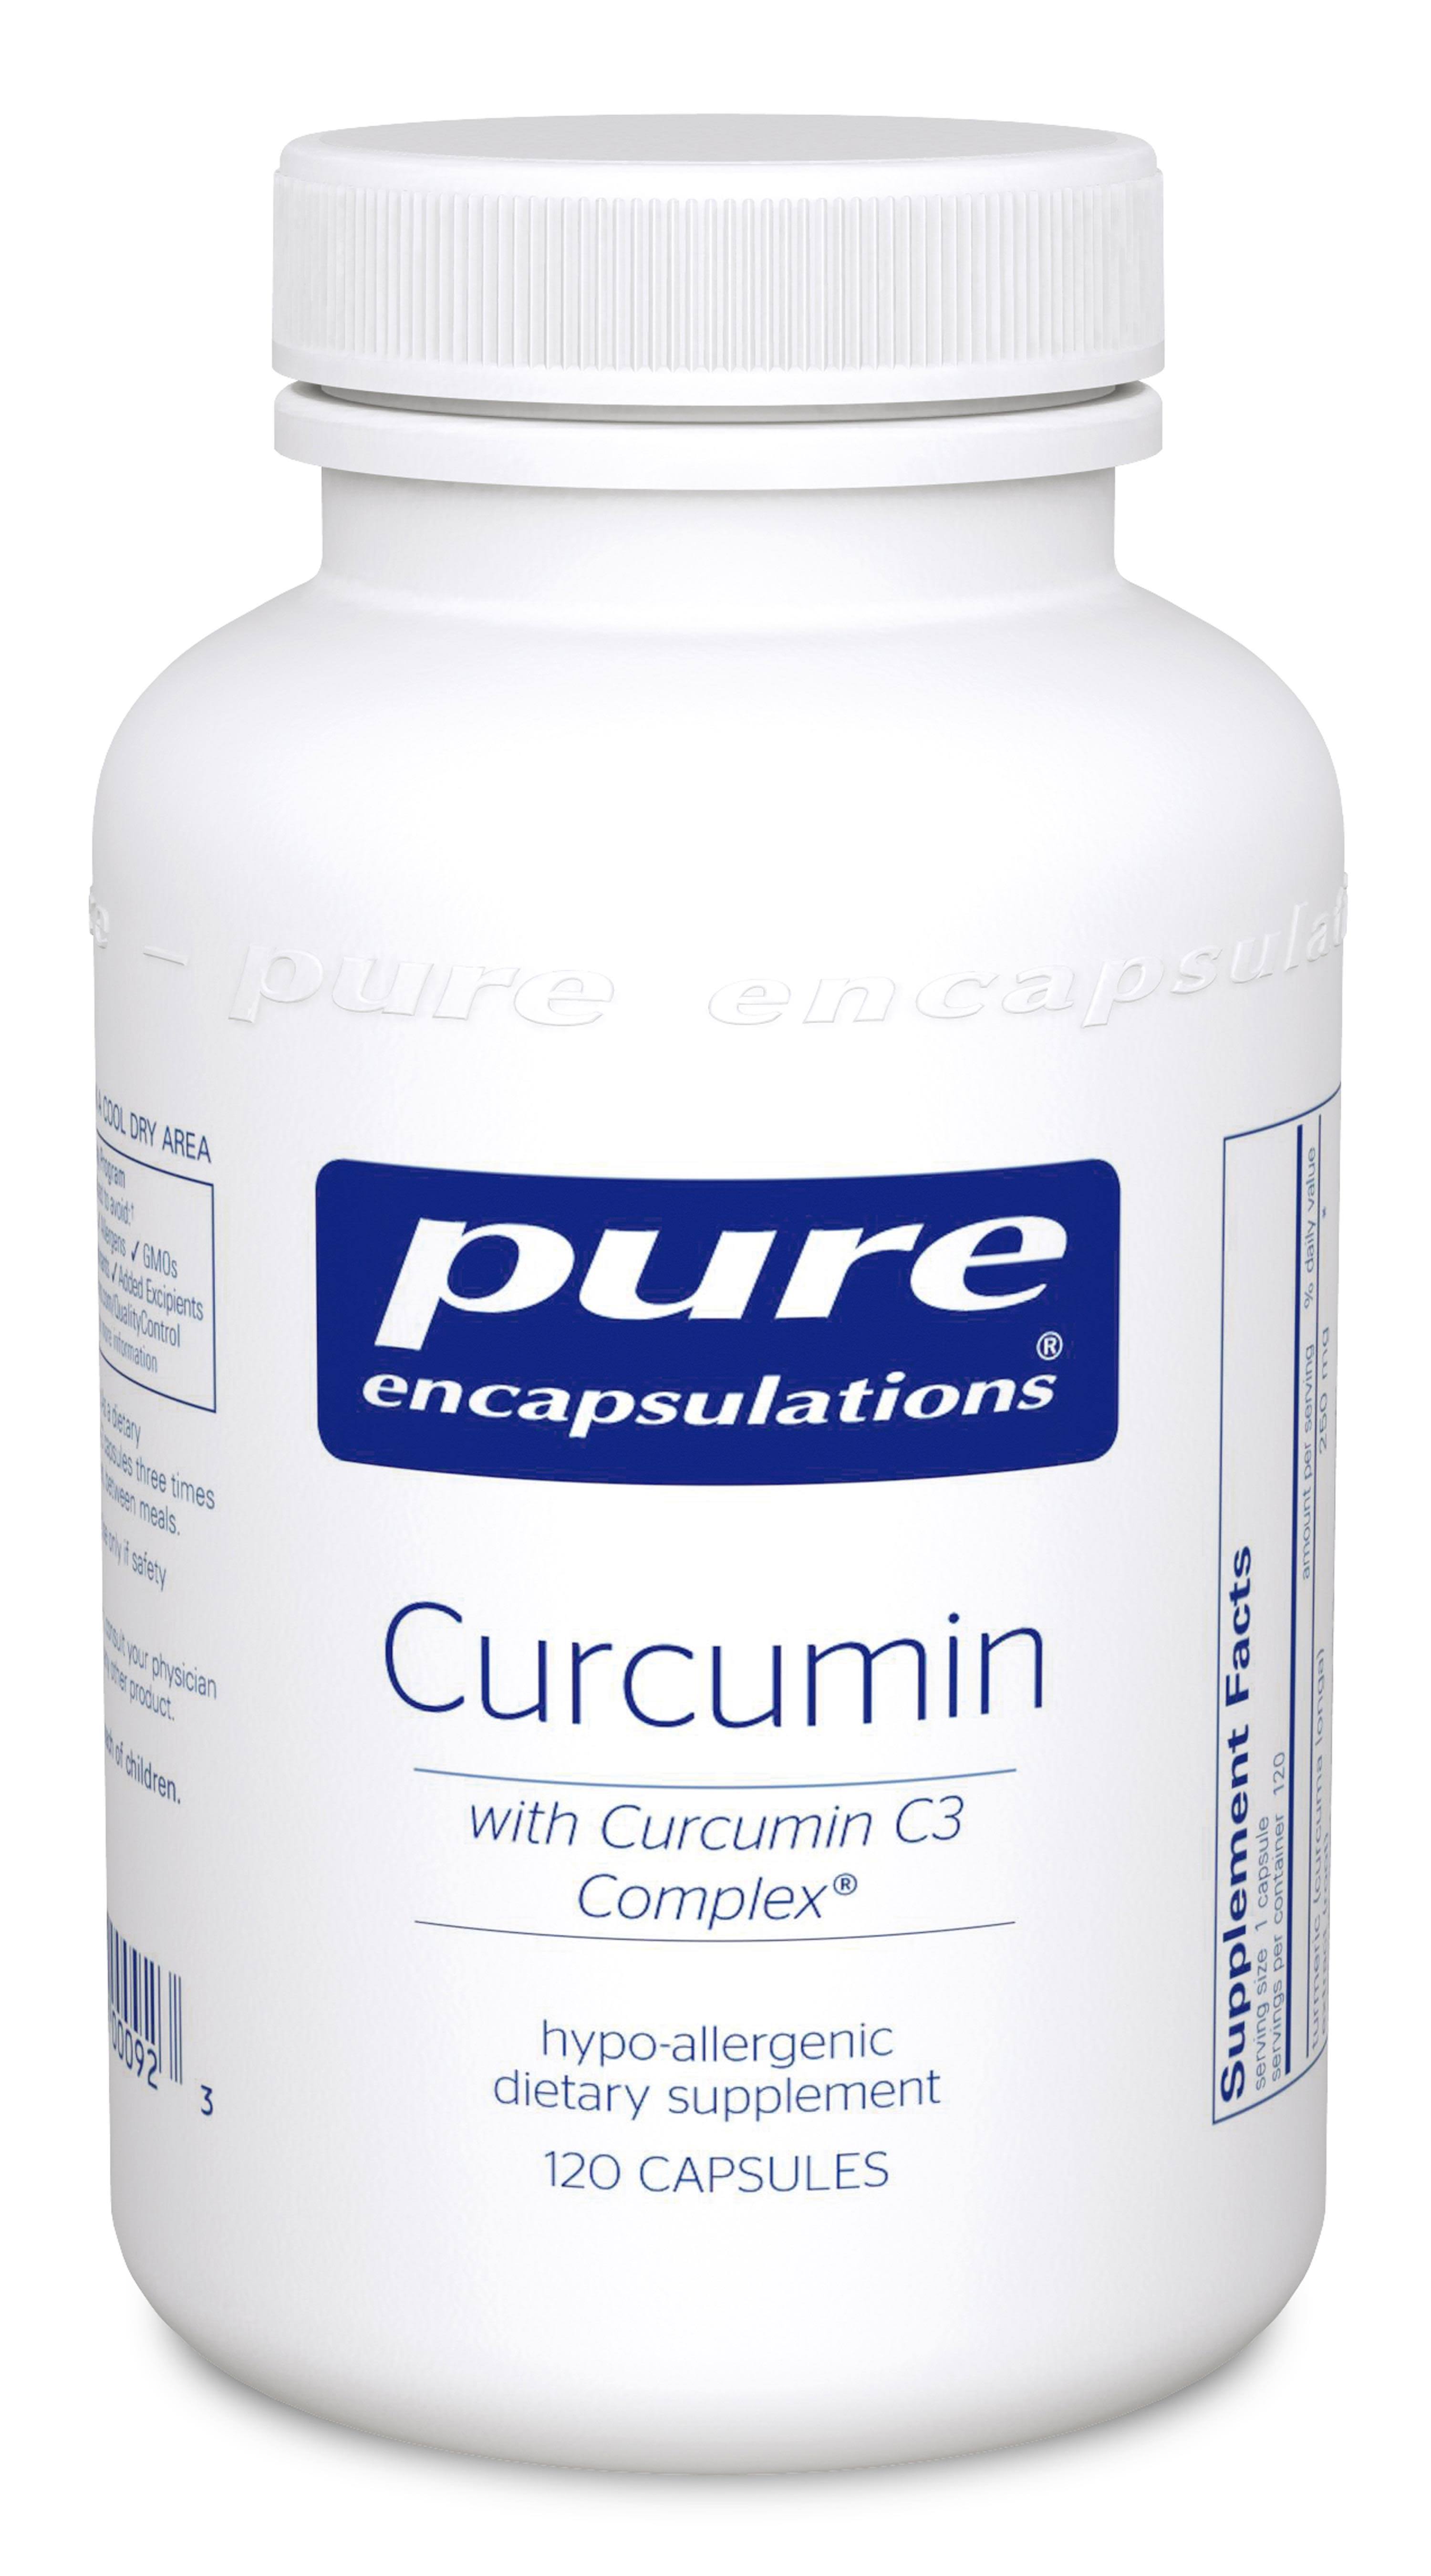 Pure Encapsulations Curcumin Dietary Supplement - with C3 Complex, 120ct